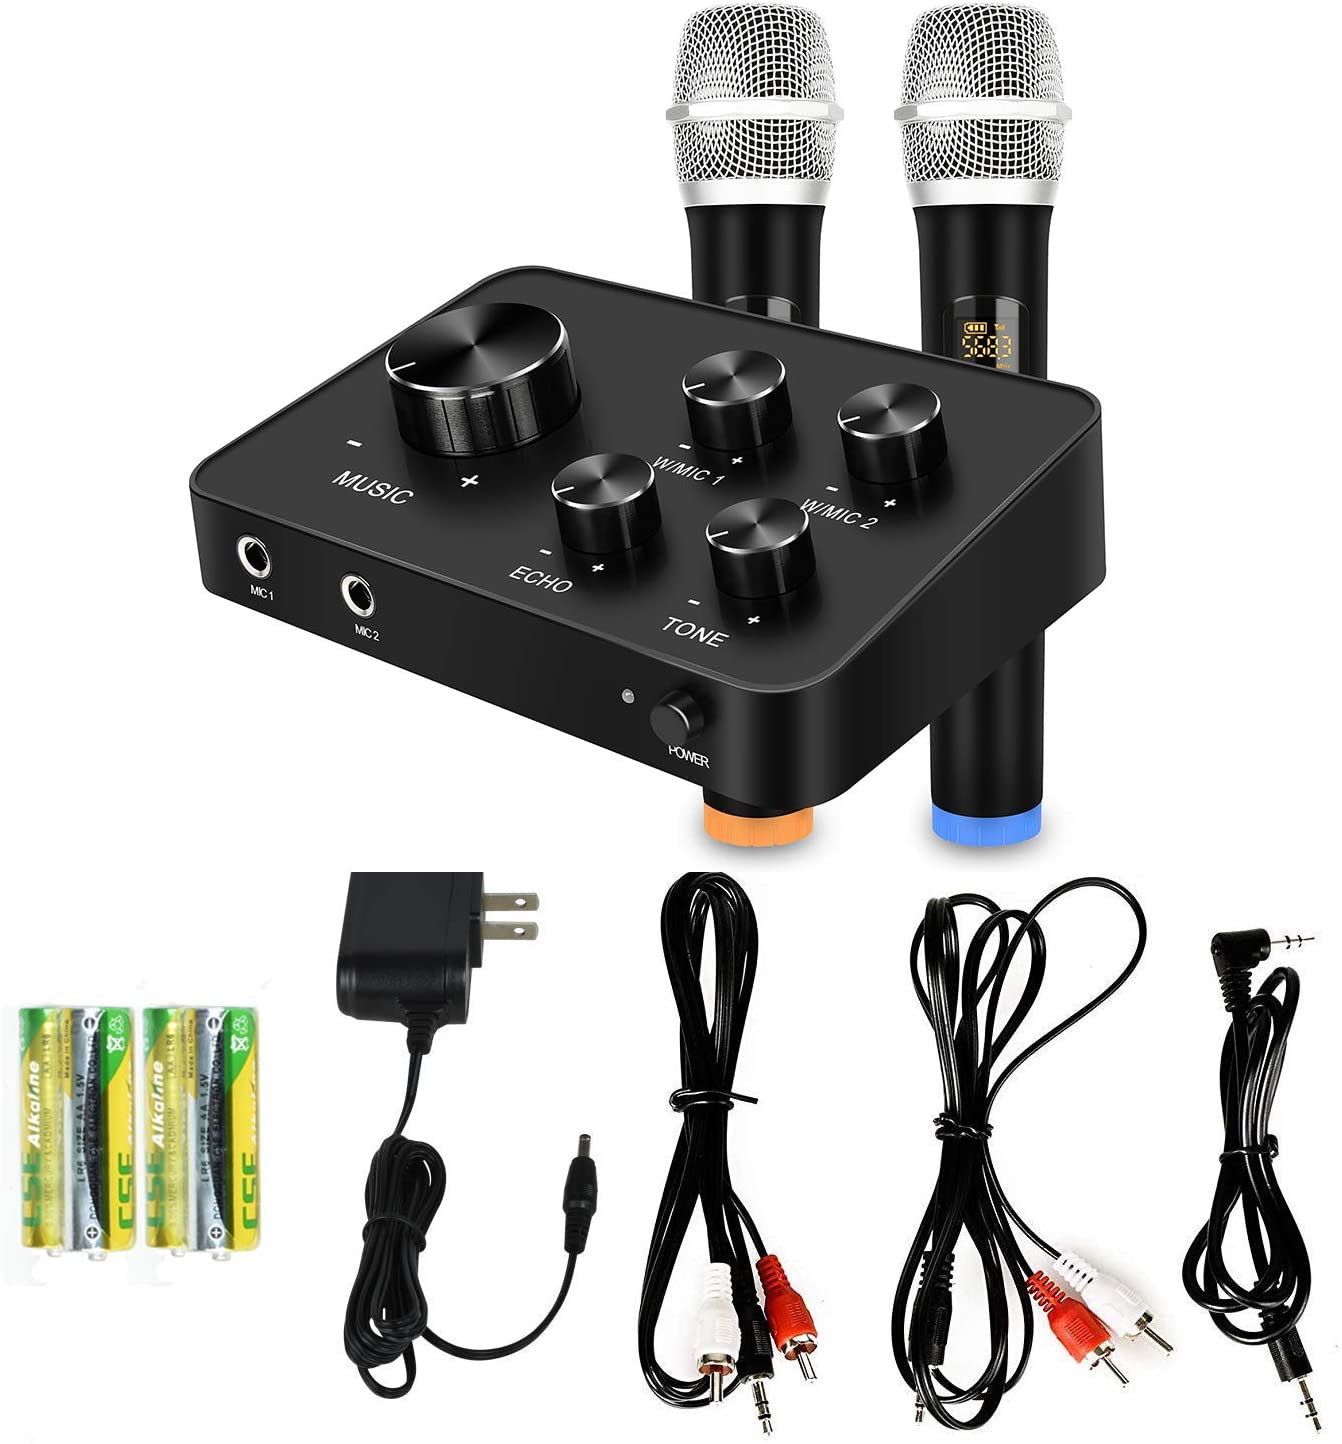 Portable Karaoke Microphone Mixer System Set, with Dual UHF Wireless Mic, HDMI & AUX In/Out for Karaoke, Home Theater, Amplifier, Speaker